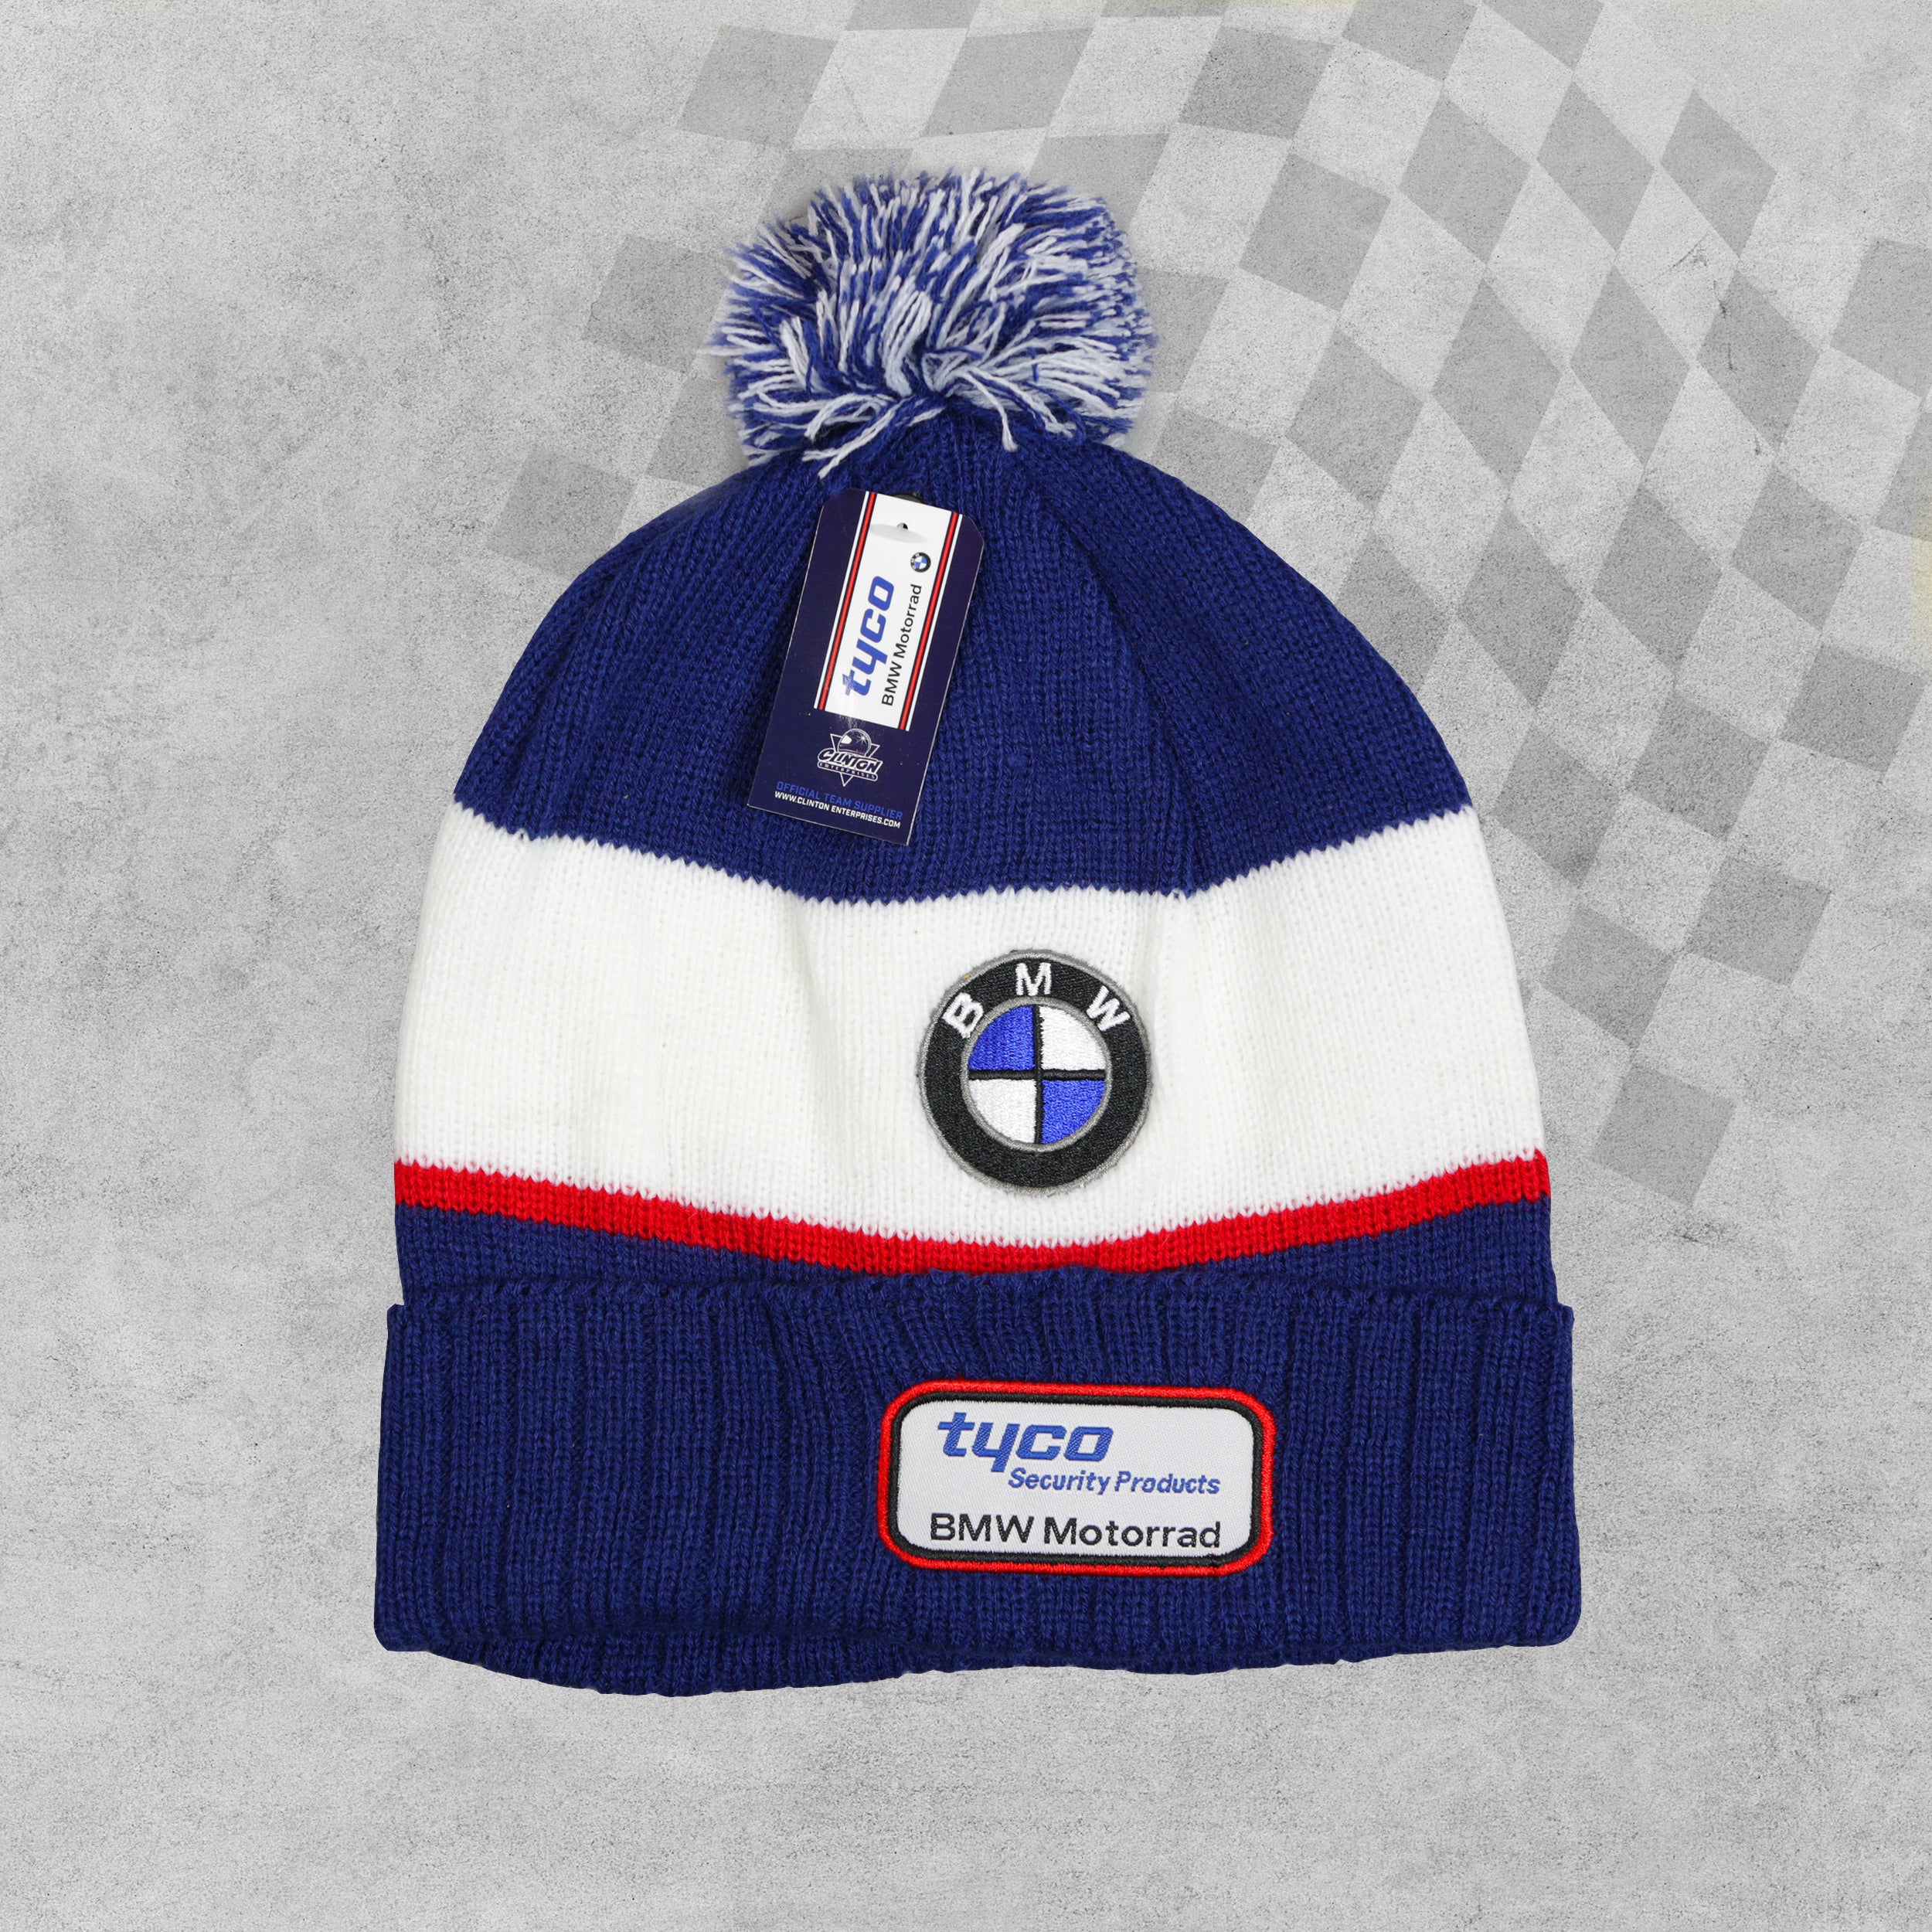 BMW Motorrad Tyco BSB Ski Hat sold by In-Excess